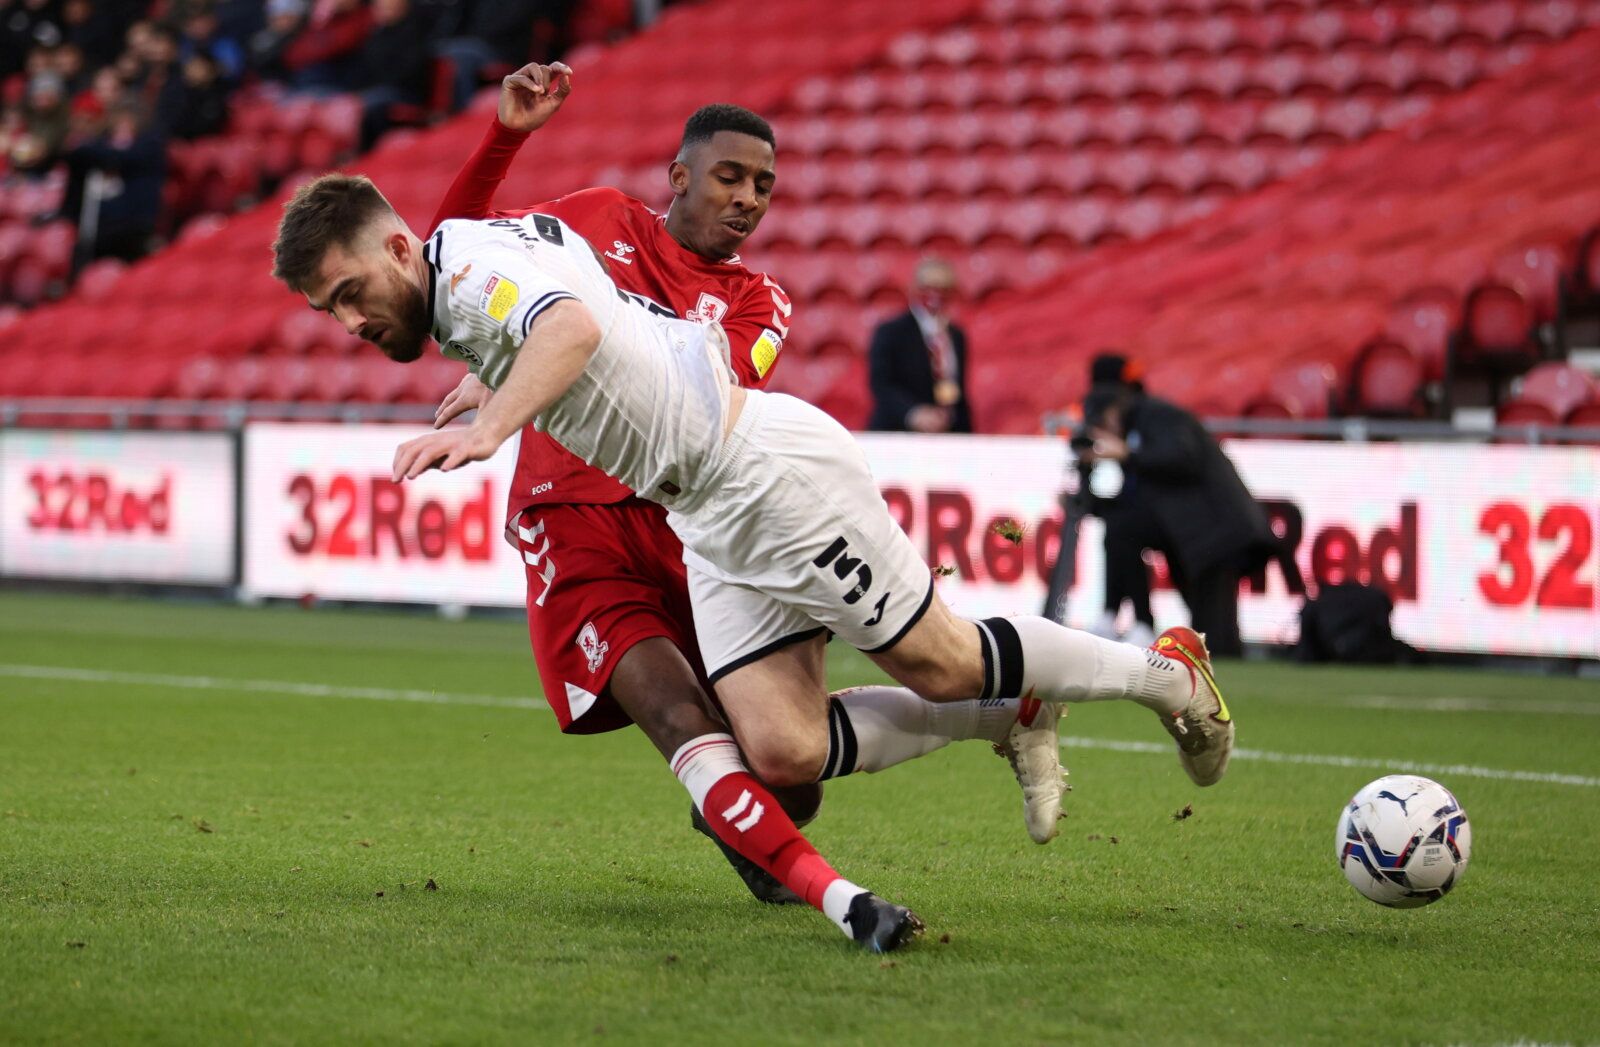 Soccer Football - Middlesbrough v Swansea City - Riverside Stadium, Middlesbrough, Britain - December 4, 2021  Swansea City's Ryan Manning in action with Middlesbrough's Isaiah Jones  Action Images/John Clifton  EDITORIAL USE ONLY. No use with unauthorized audio, video, data, fixture lists, club/league logos or 